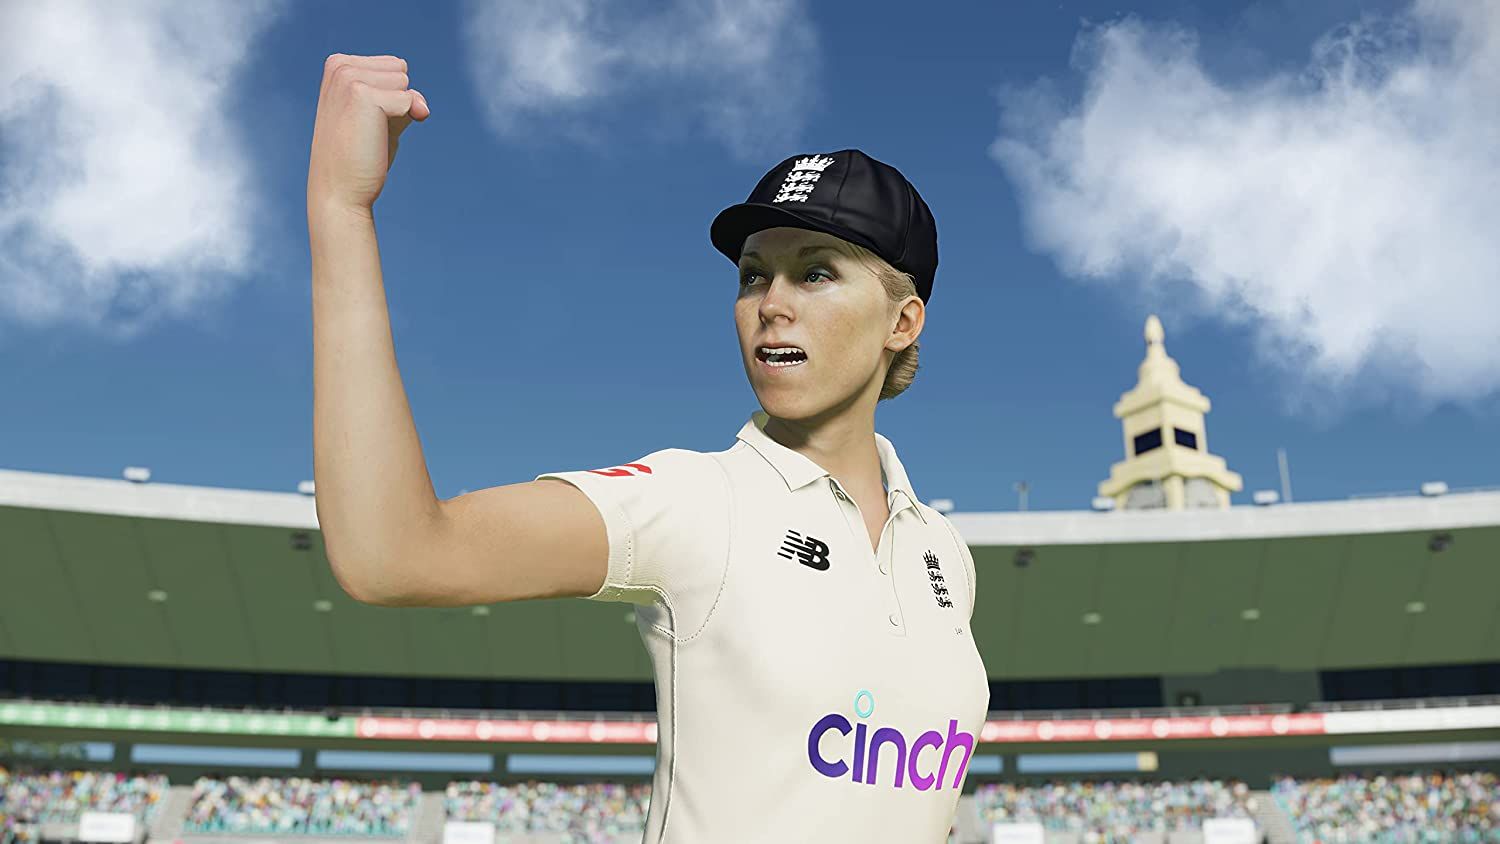 Cricket 22 - The Official Game of The Ashes (PS5) 4